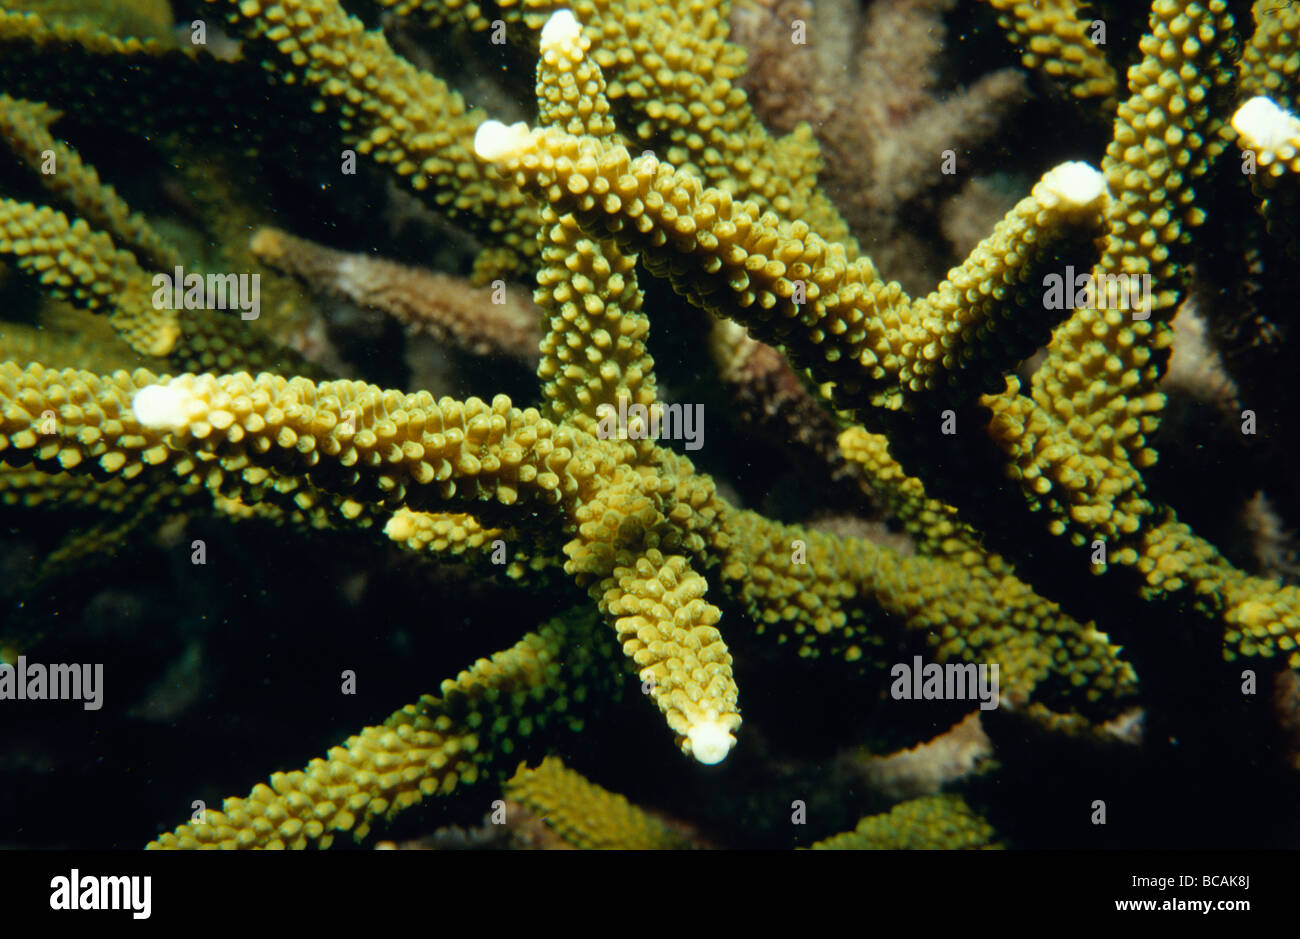 The noduled texture of the arms of a Staghorn Coral, Acropora species. Stock Photo